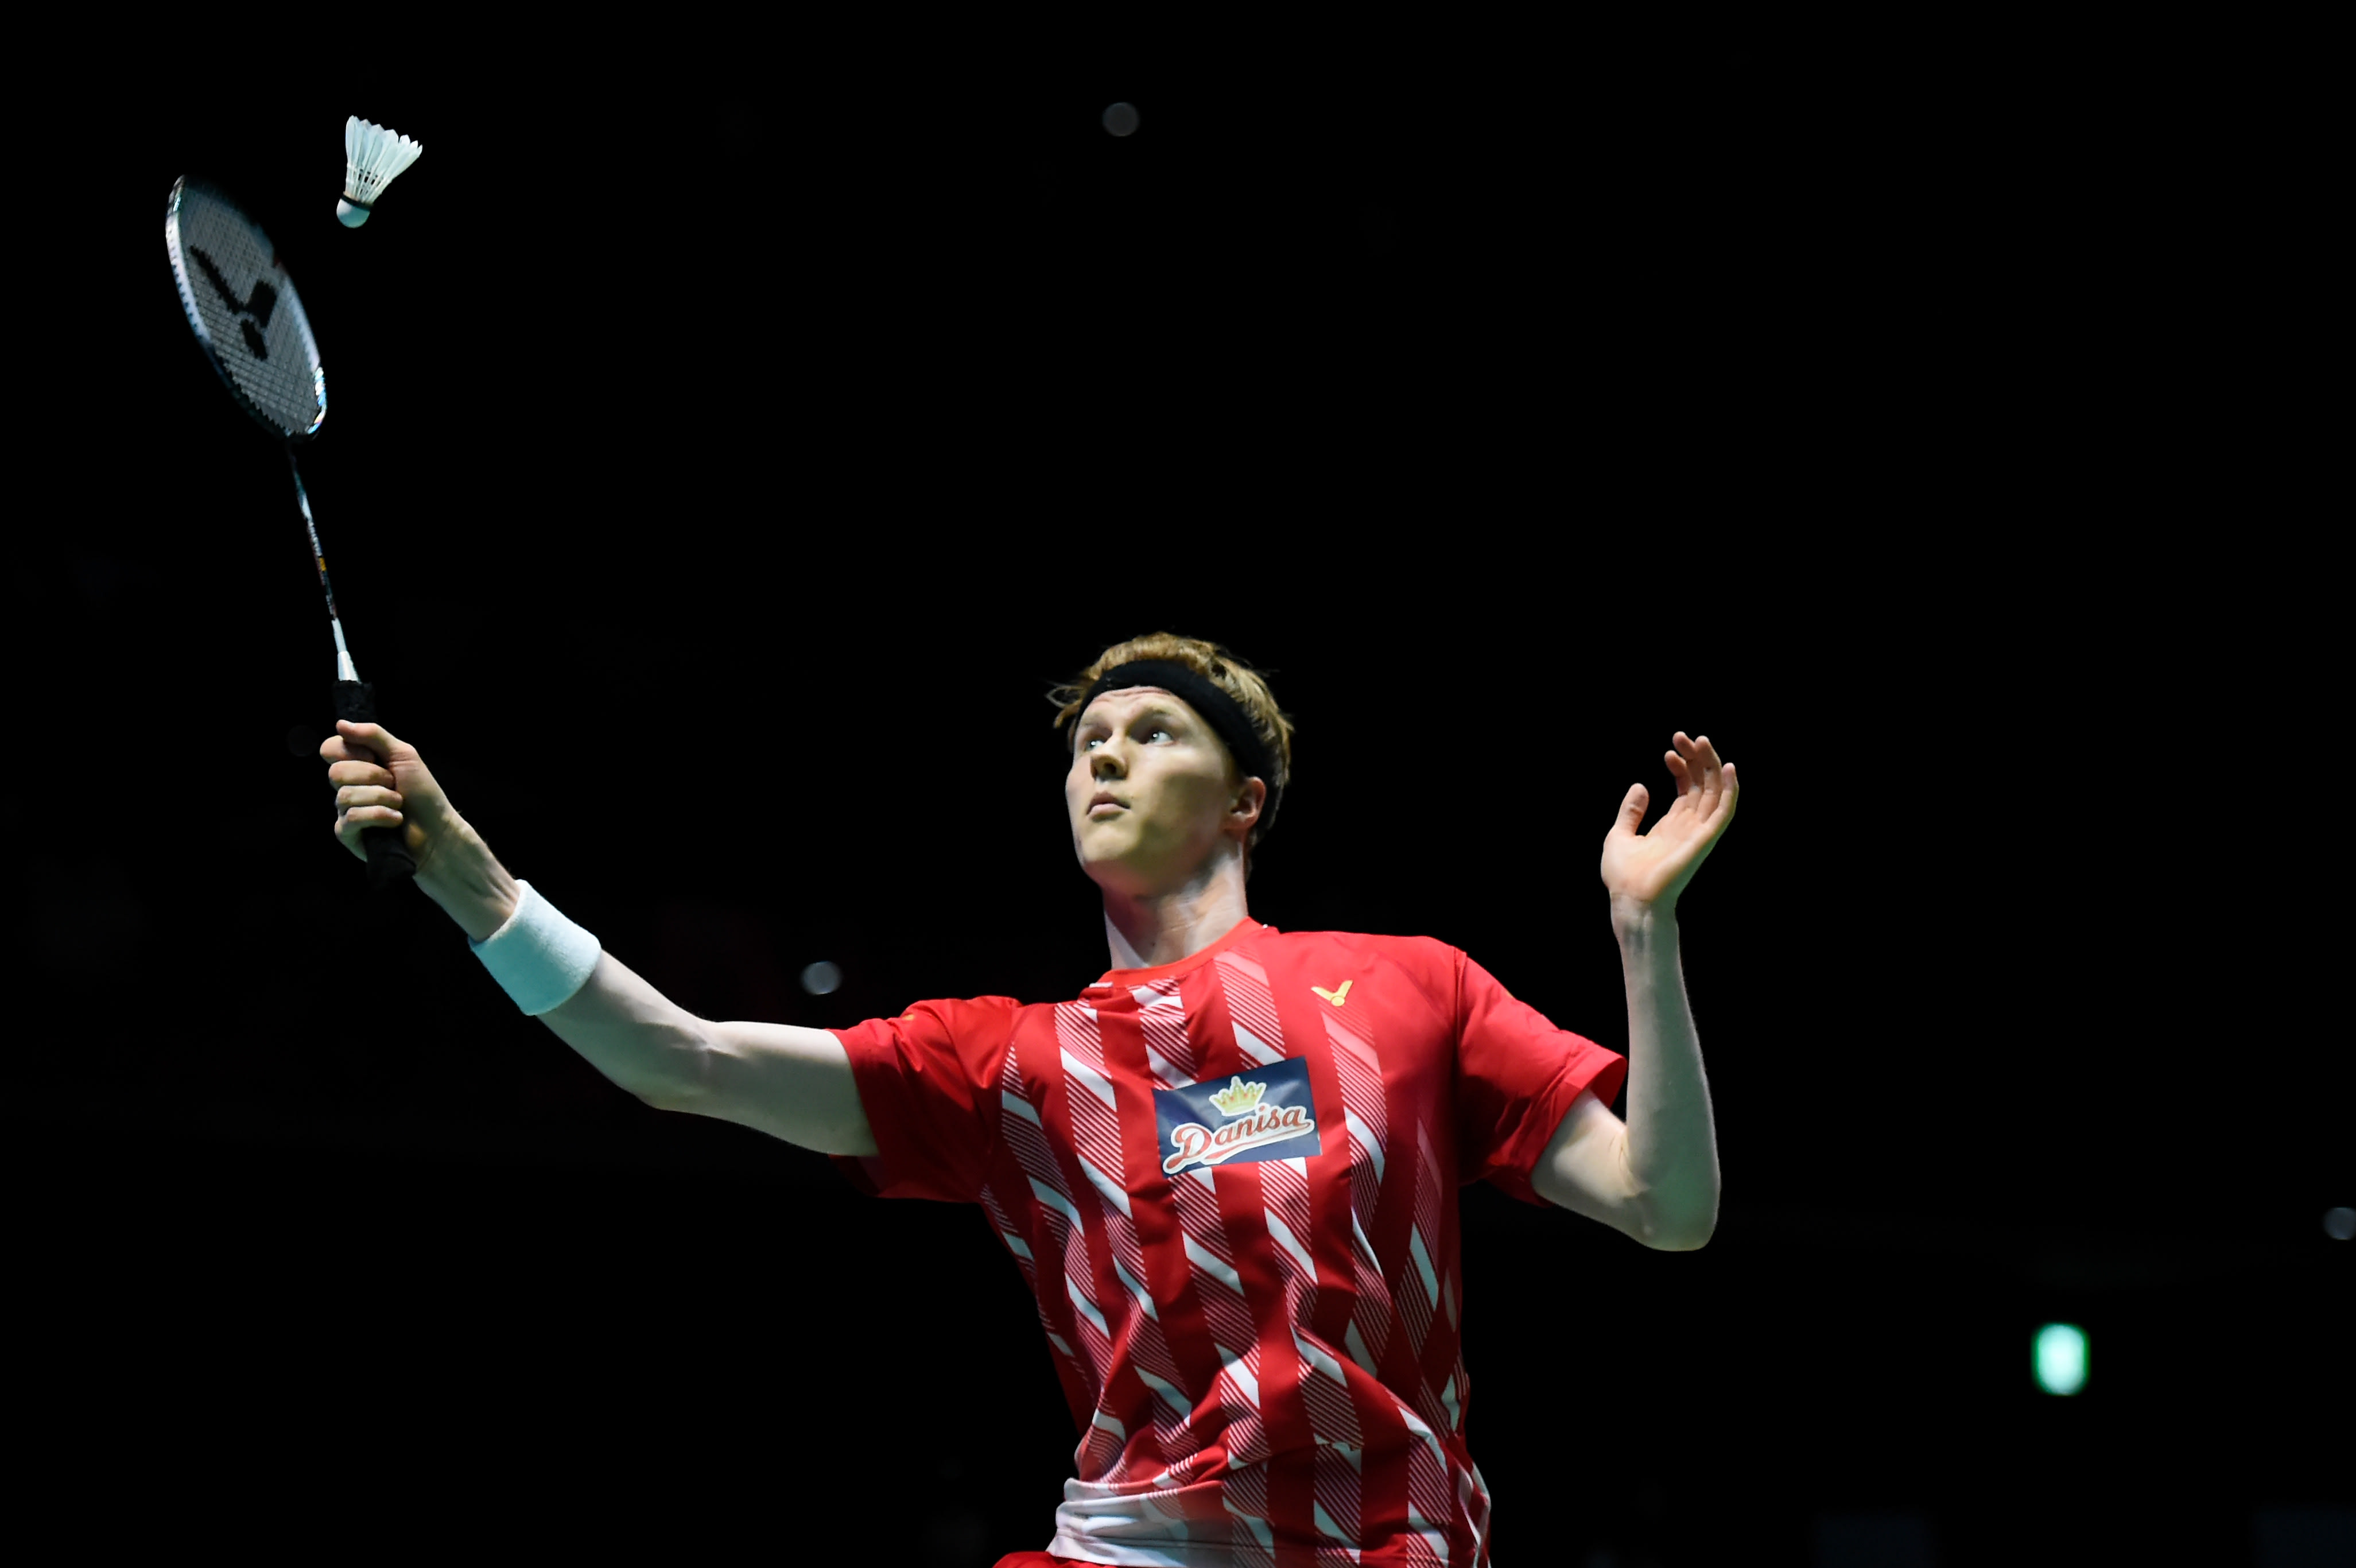 Badminton Is Back Denmark Open 2020 Taking Place This Week